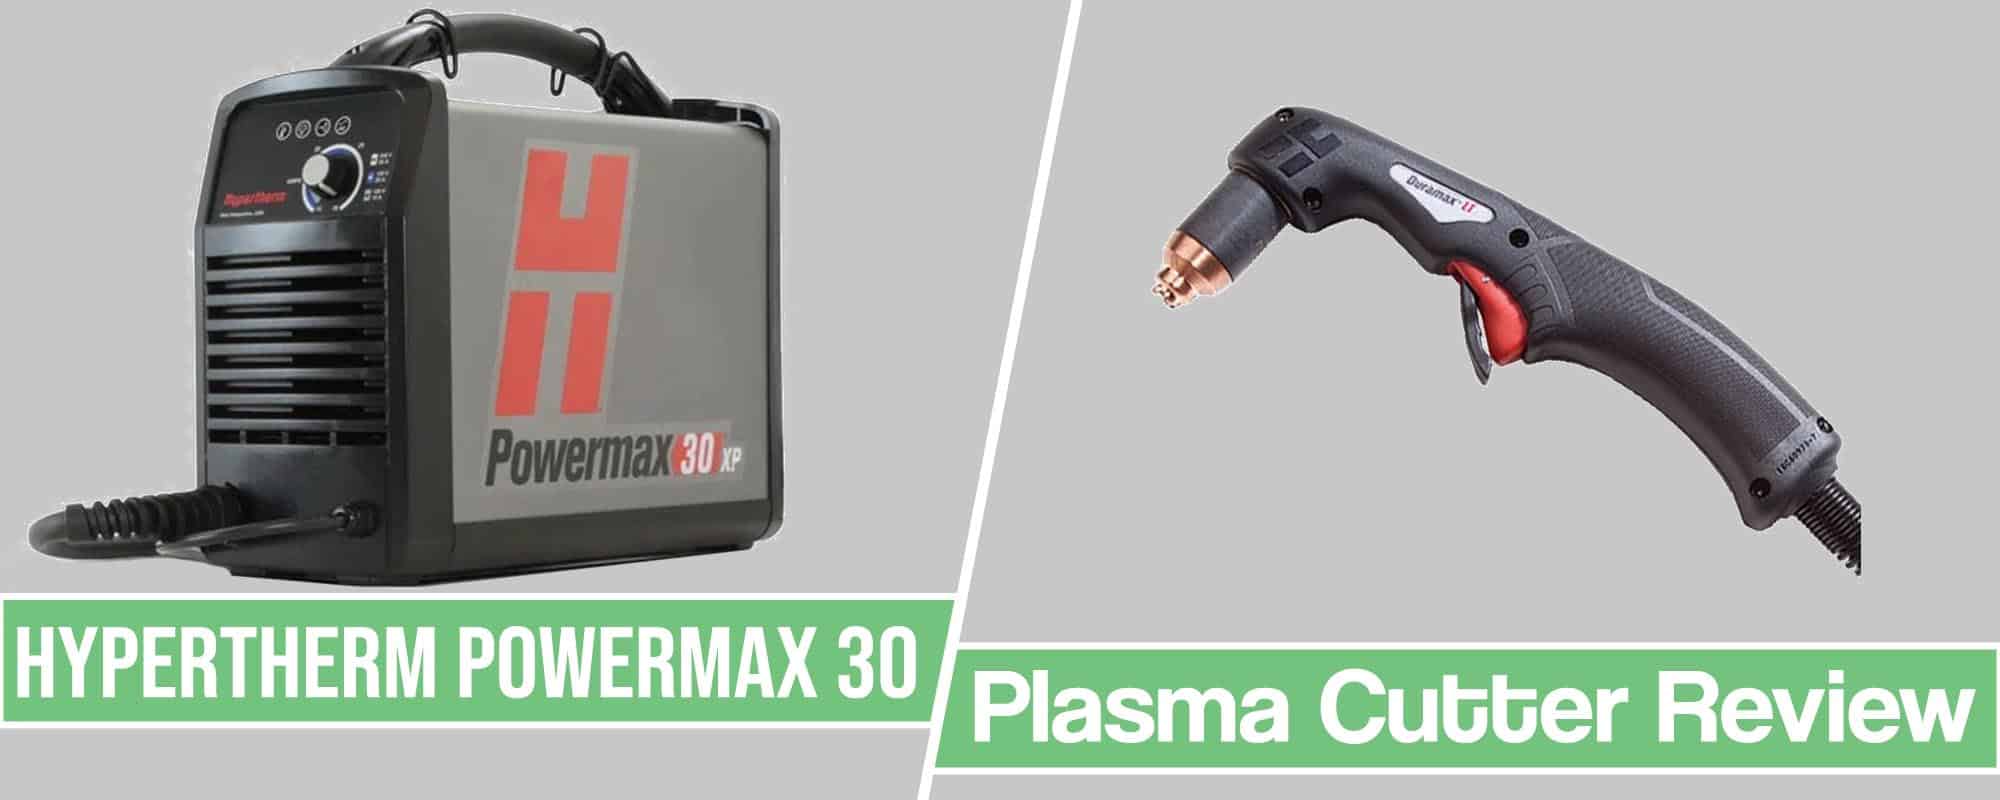 Hypertherm Powermax 30 Plasma Cutter Review – Overview of Price, Quality and Features